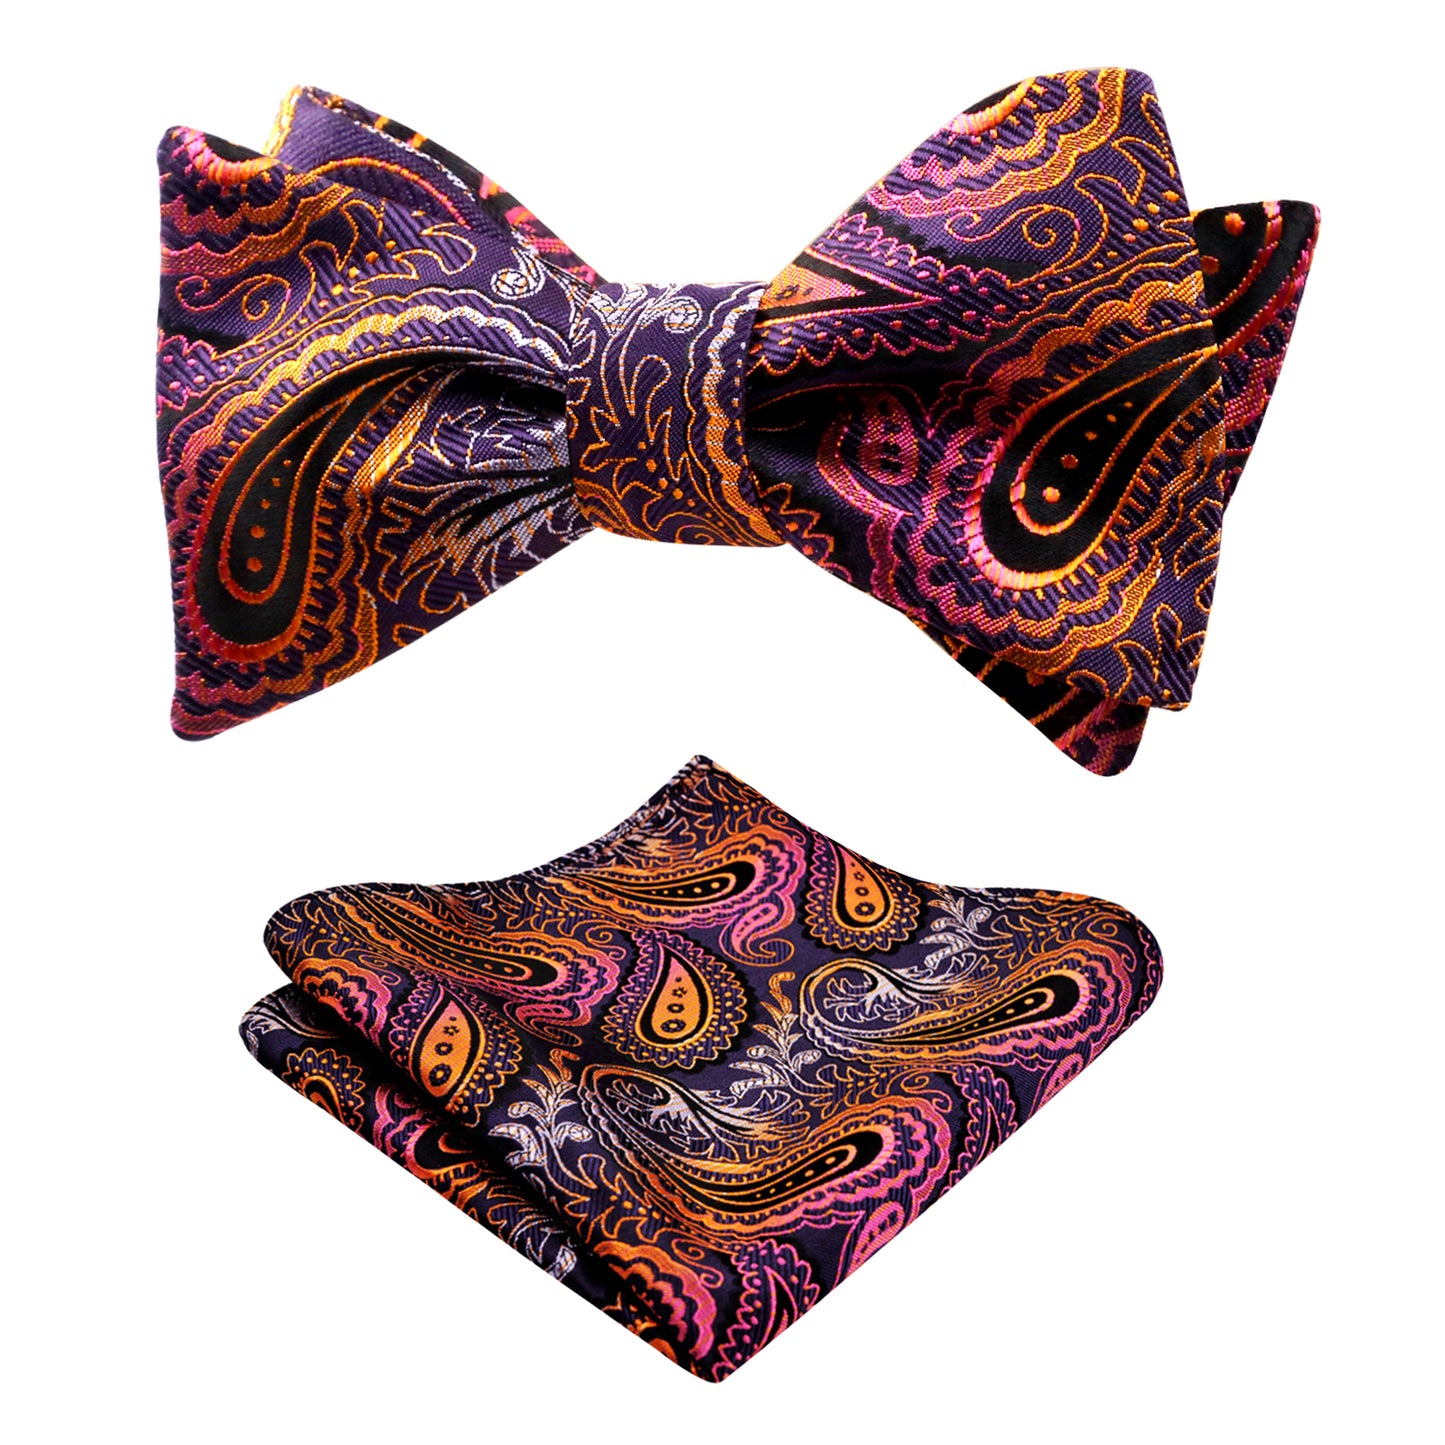 Men's Shinny Paisley Patterned Bowtie and Pocket Square Set #044